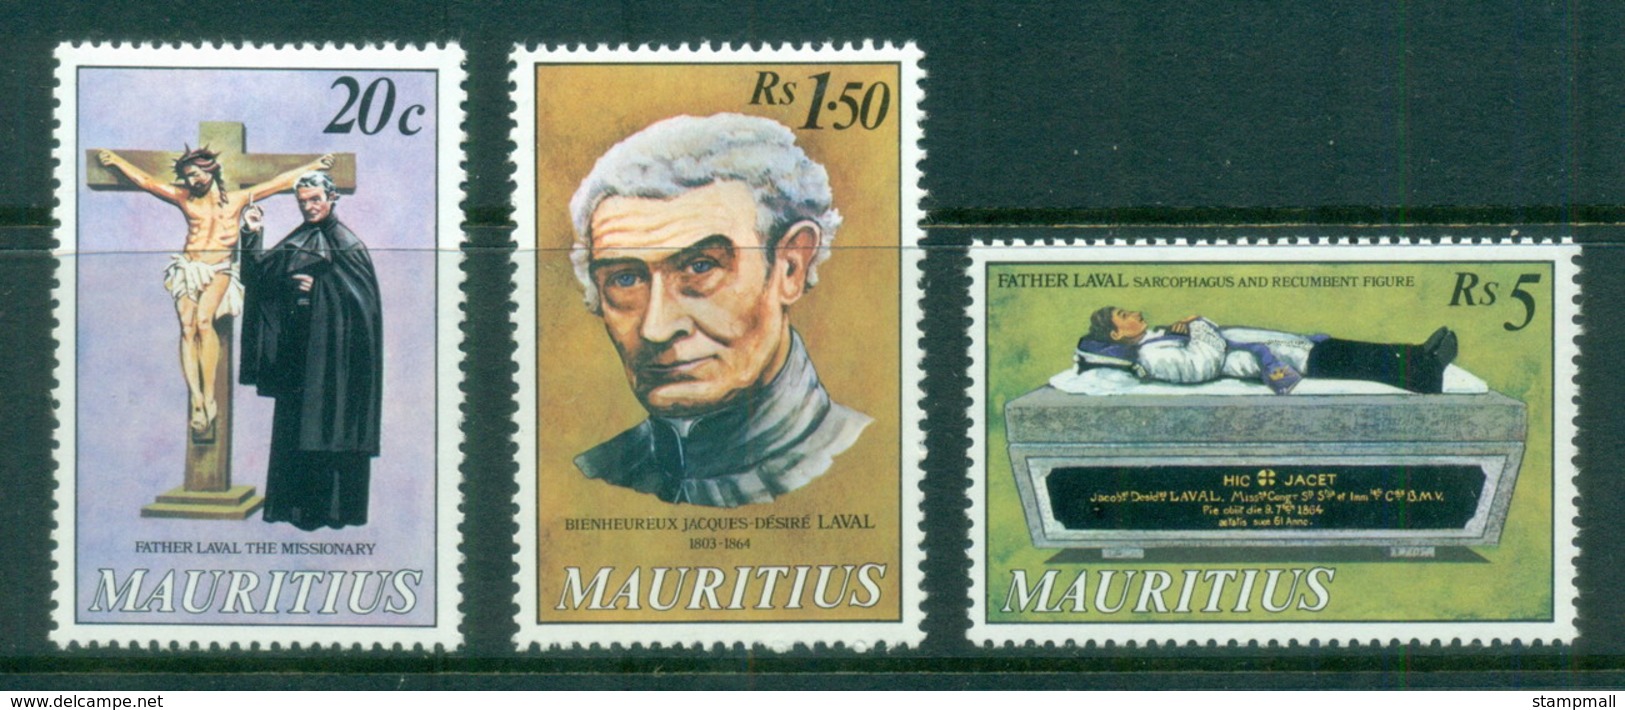 Mauritius 1979 Beatification Of Father Laval MLH - Mauritius (1968-...)